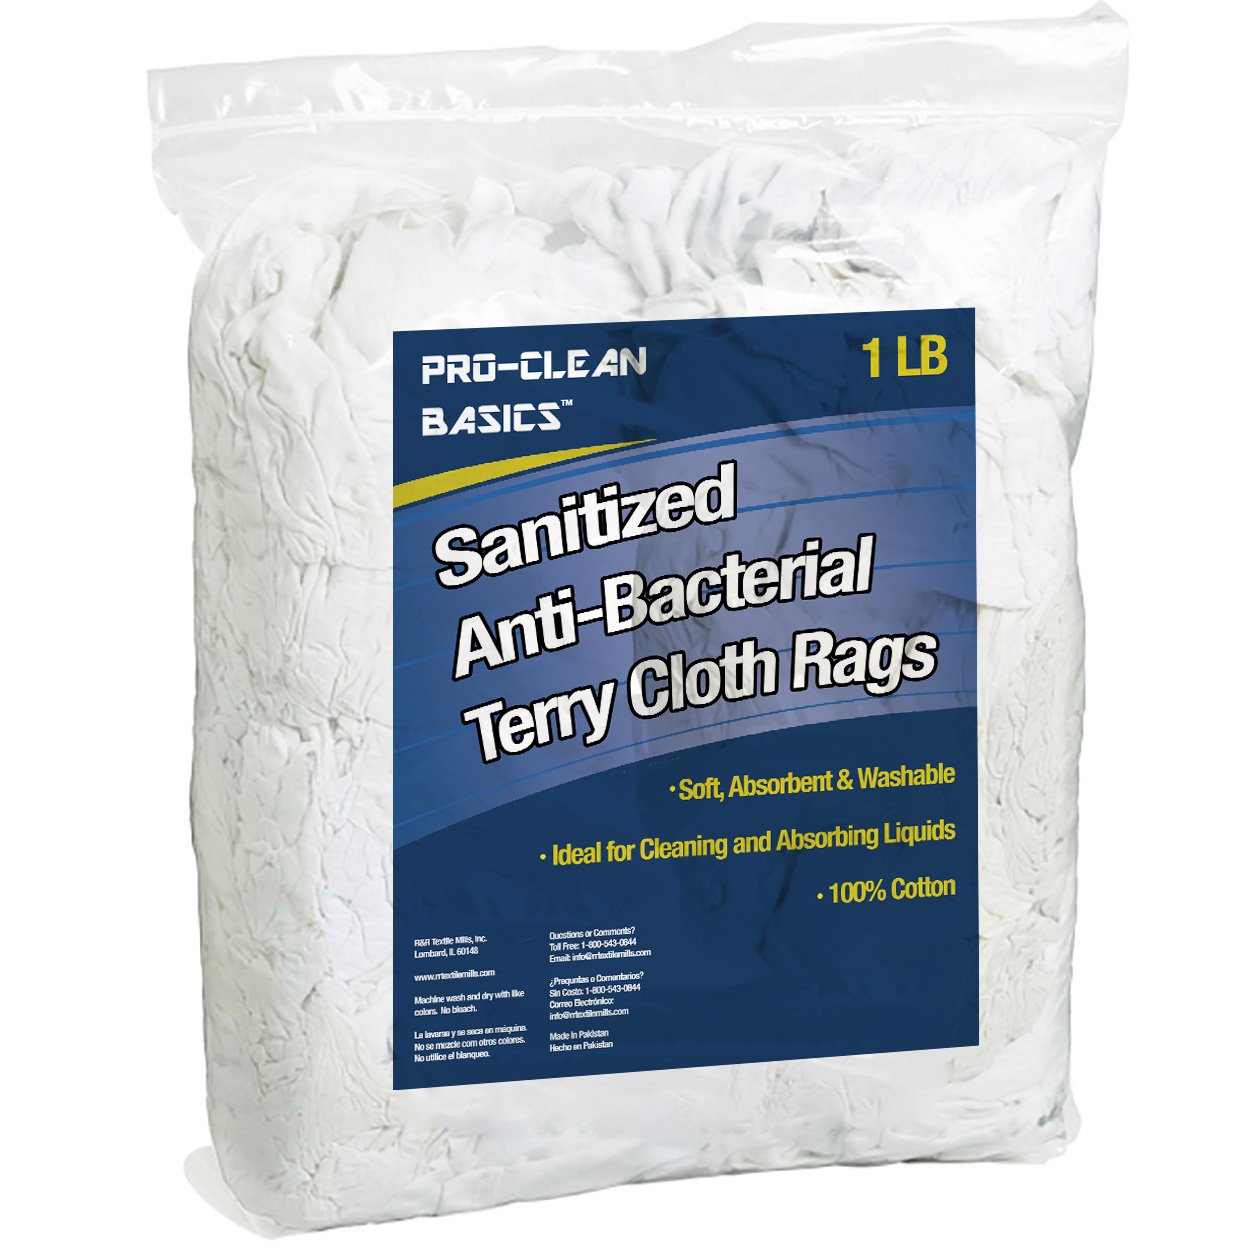 Pro-Clean Basics:  Sanitized Anti-Bacterial Terry Cloth Rags - White